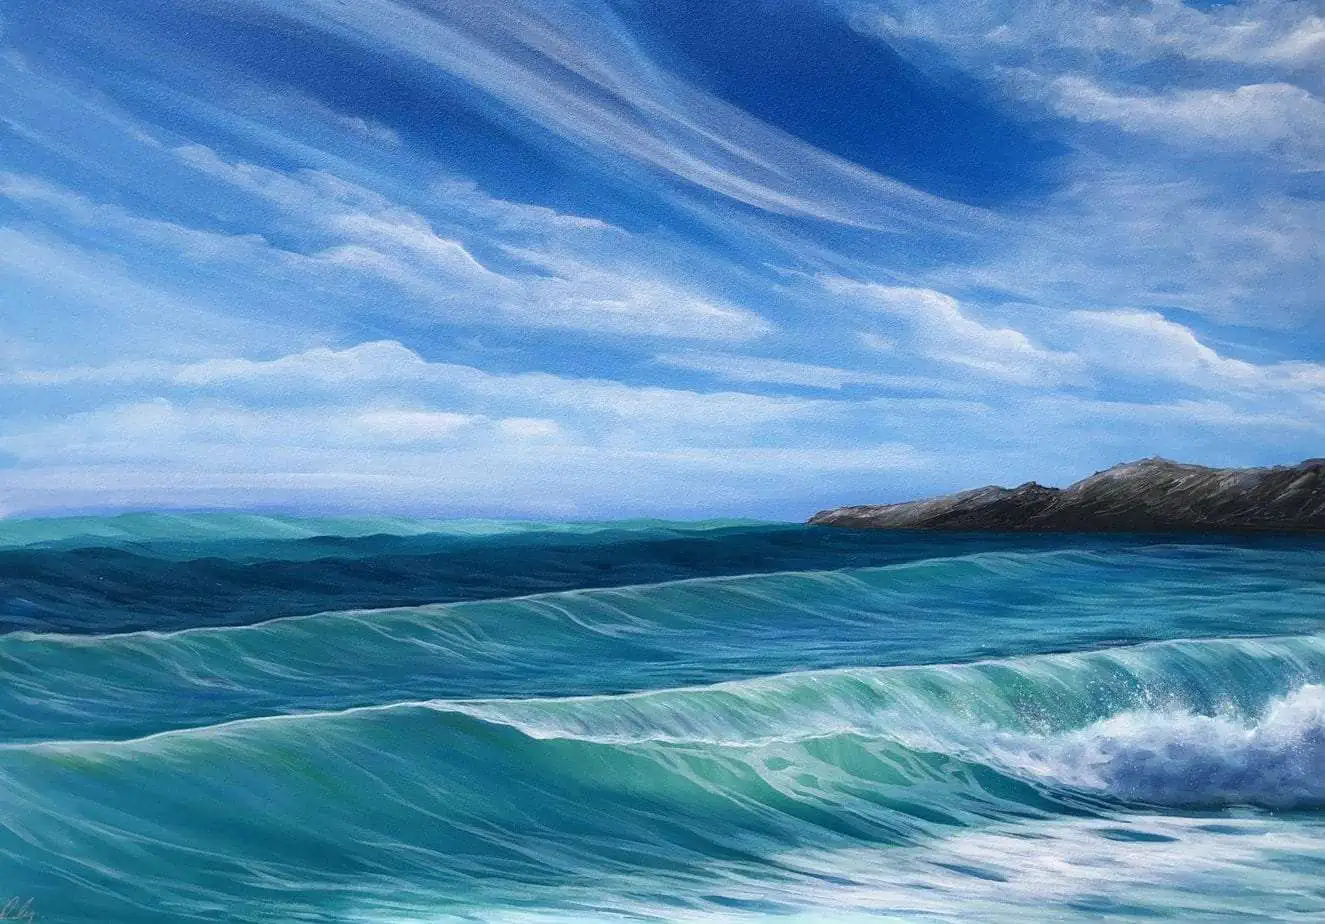 Fistral Rolling Waves original seascape oil painting on canvas for sale online